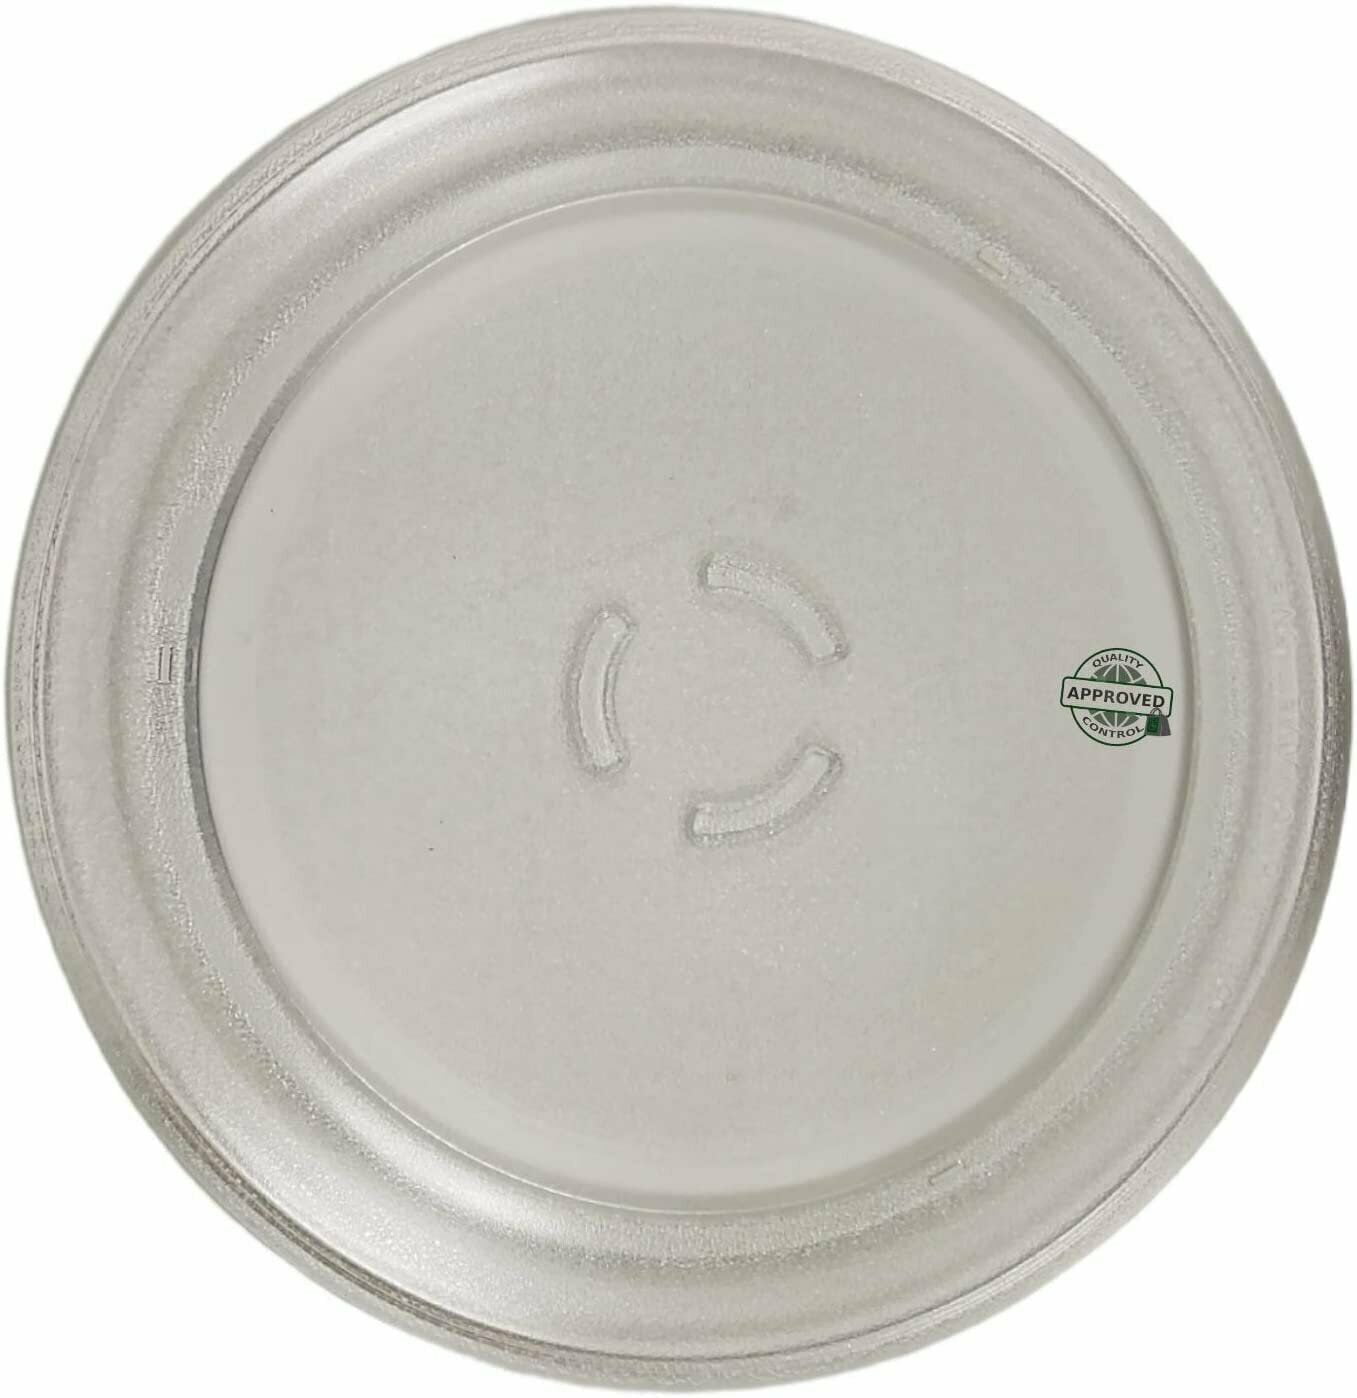 Sainsburys Microwave Glass Turntable Plate 245mm with 3 pips/projections 